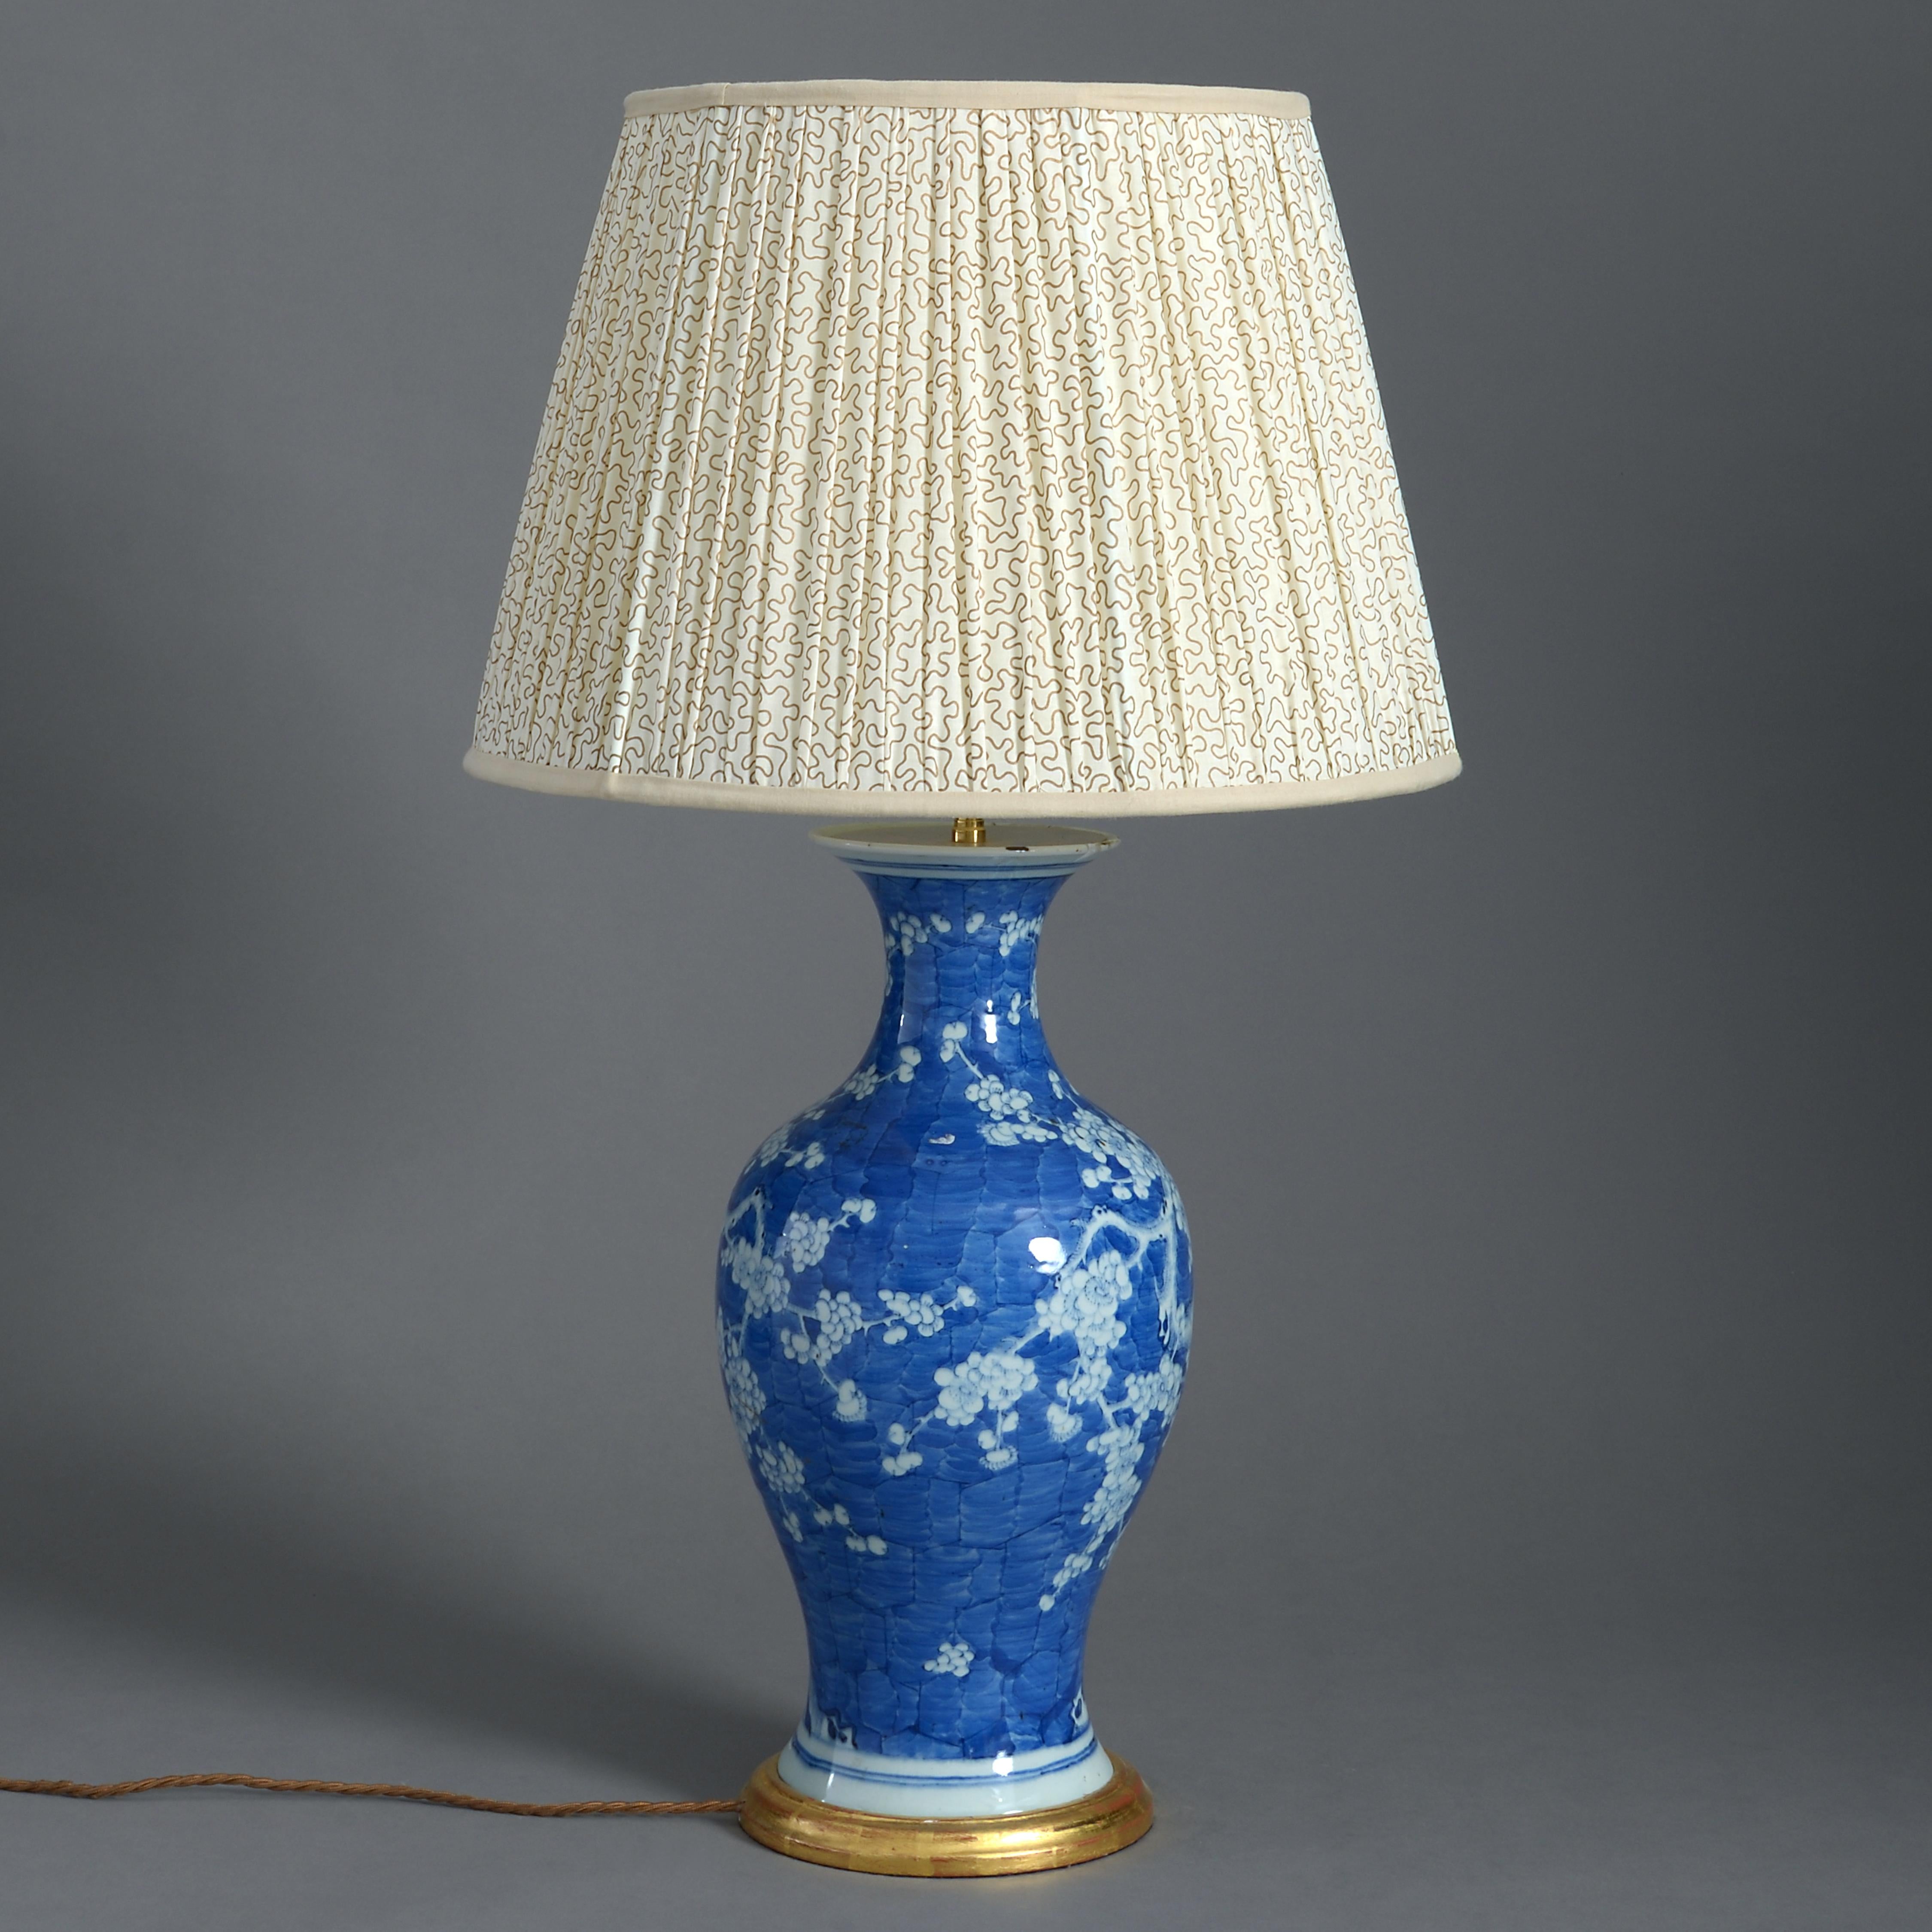 A 19th century blue and white glazed porcelain baluster vase, with prunus blossom decoration, now mounted as a lamp with turned water gilded base.

Dimensions refer to vase and base, excluding electrical components.